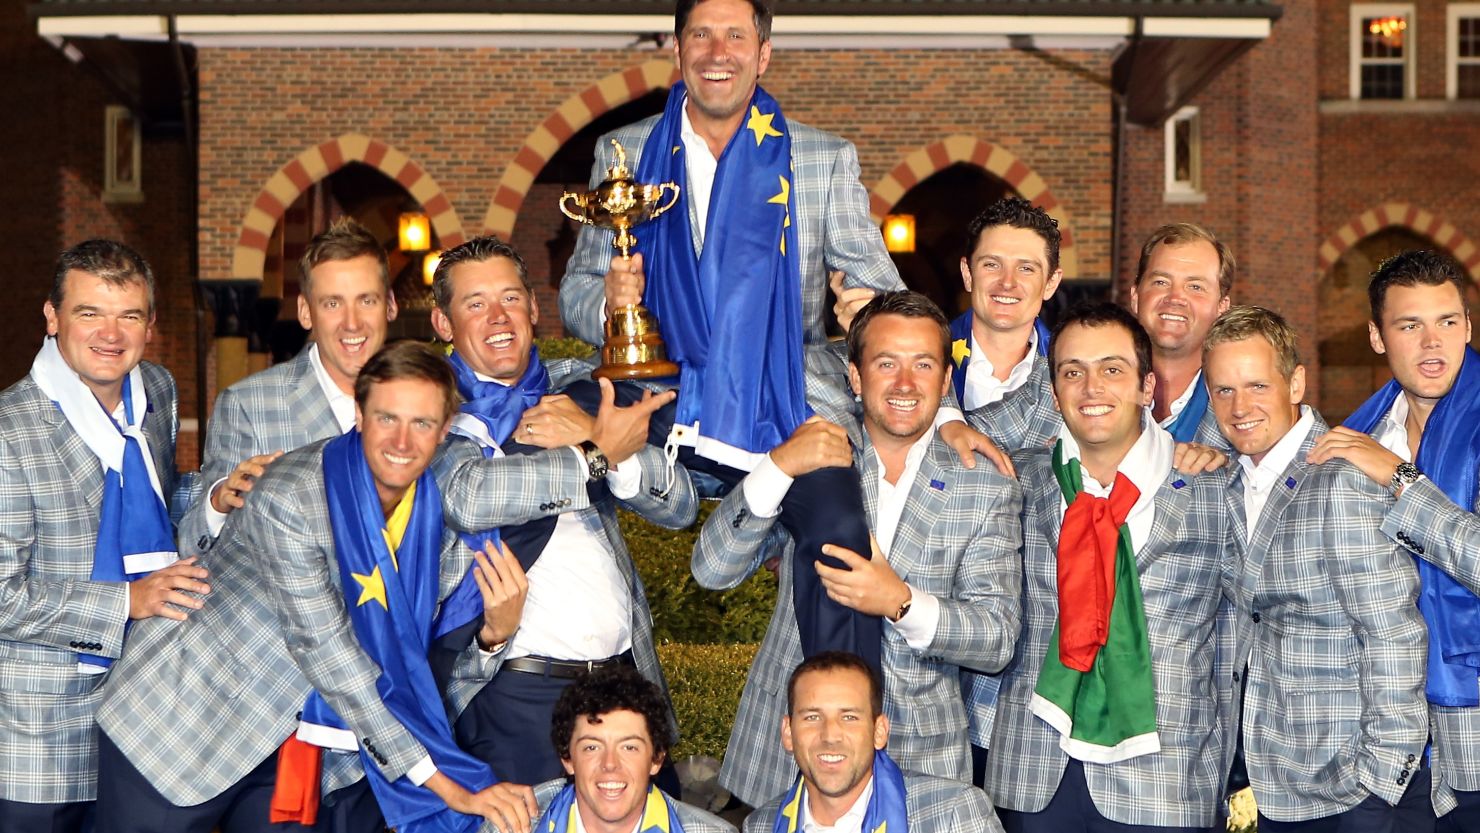 Europe's jubilant players lift their victorious Ryder Cup captain Jose Maria Olazabal in the air after winning in Chicago.